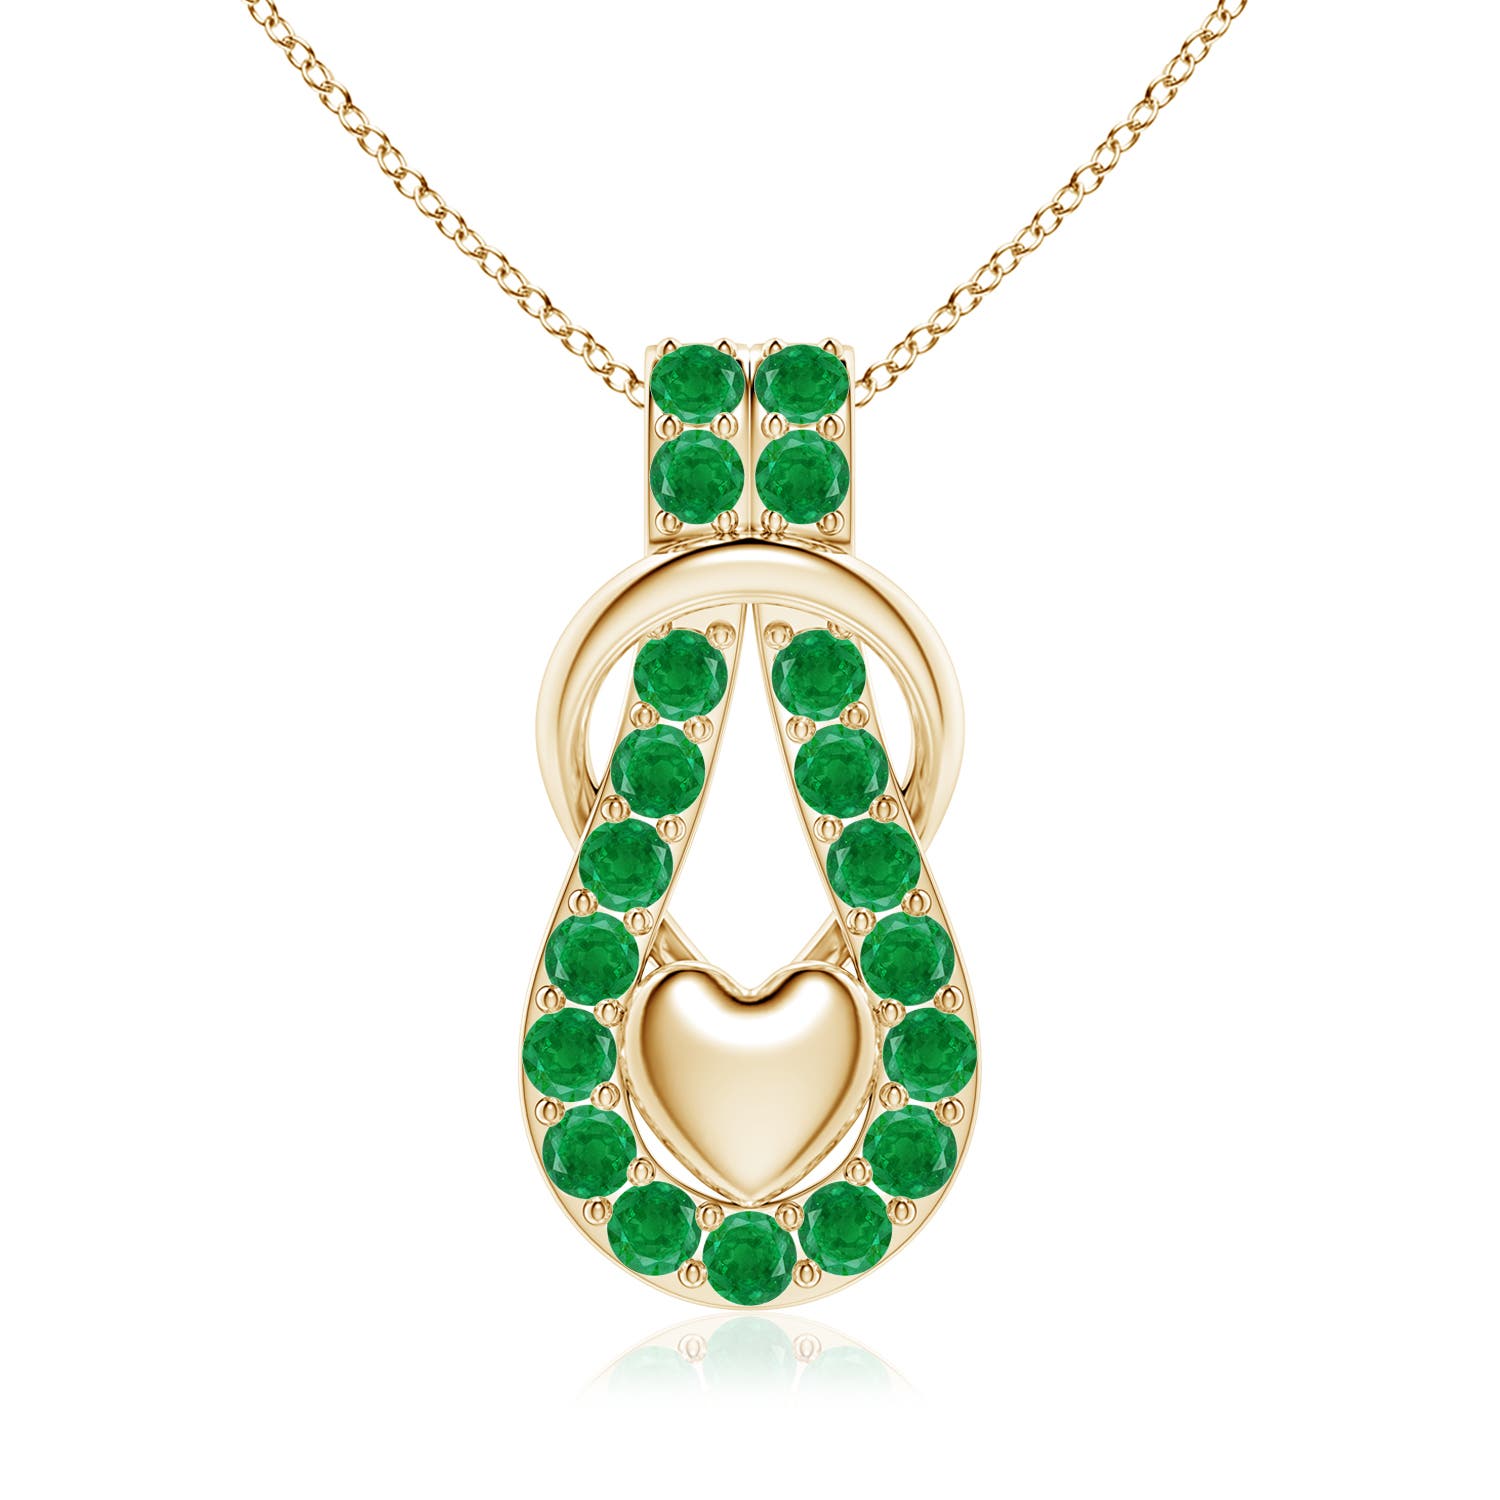 AA - Emerald / 2.85 CT / 14 KT Yellow Gold